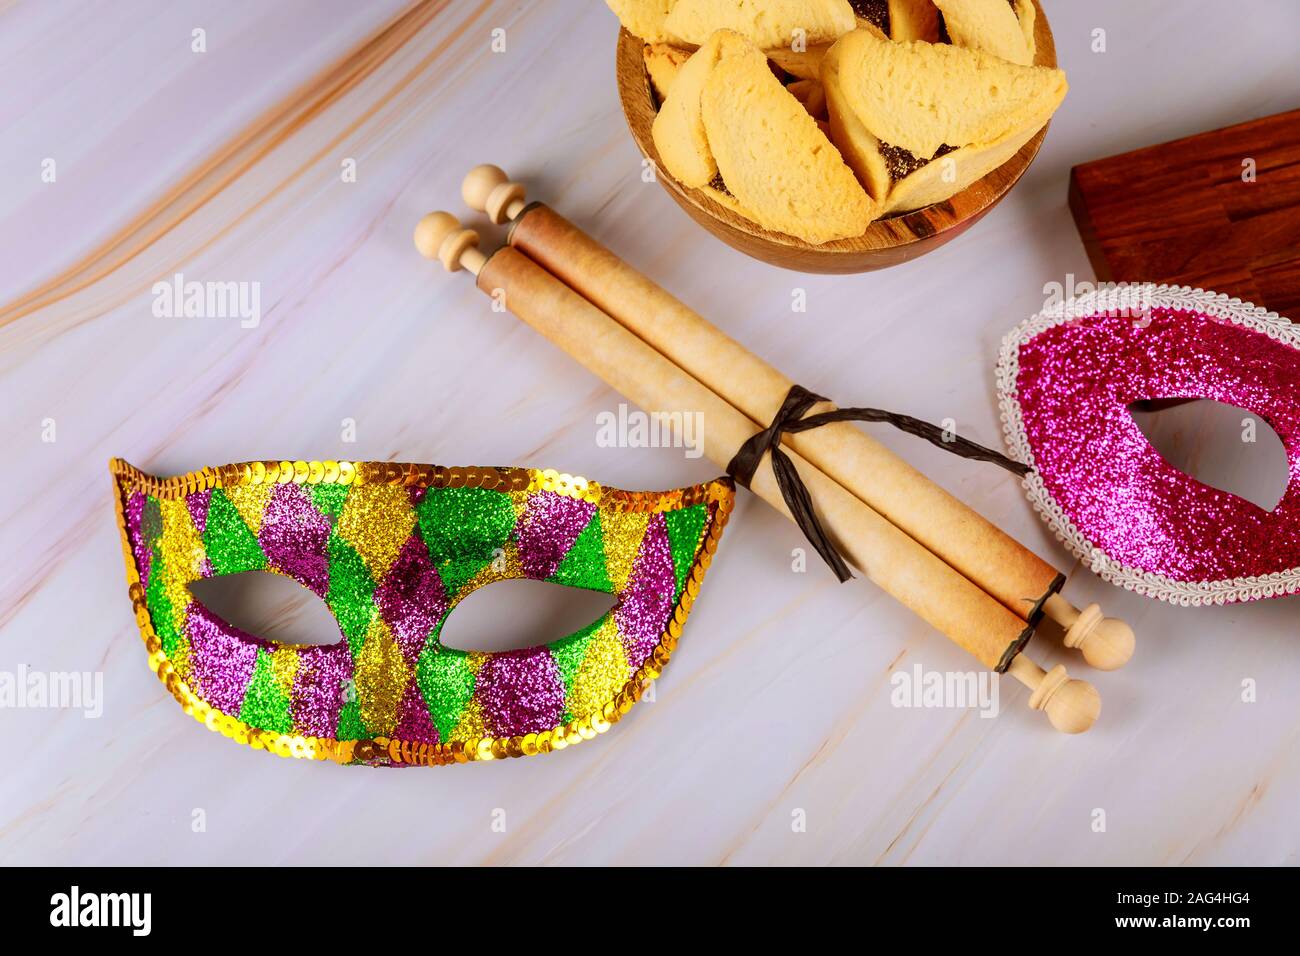 Hamantaschen hamans ears cookies Purim celebration jewish holiday bright party tools and decoration Stock Photo